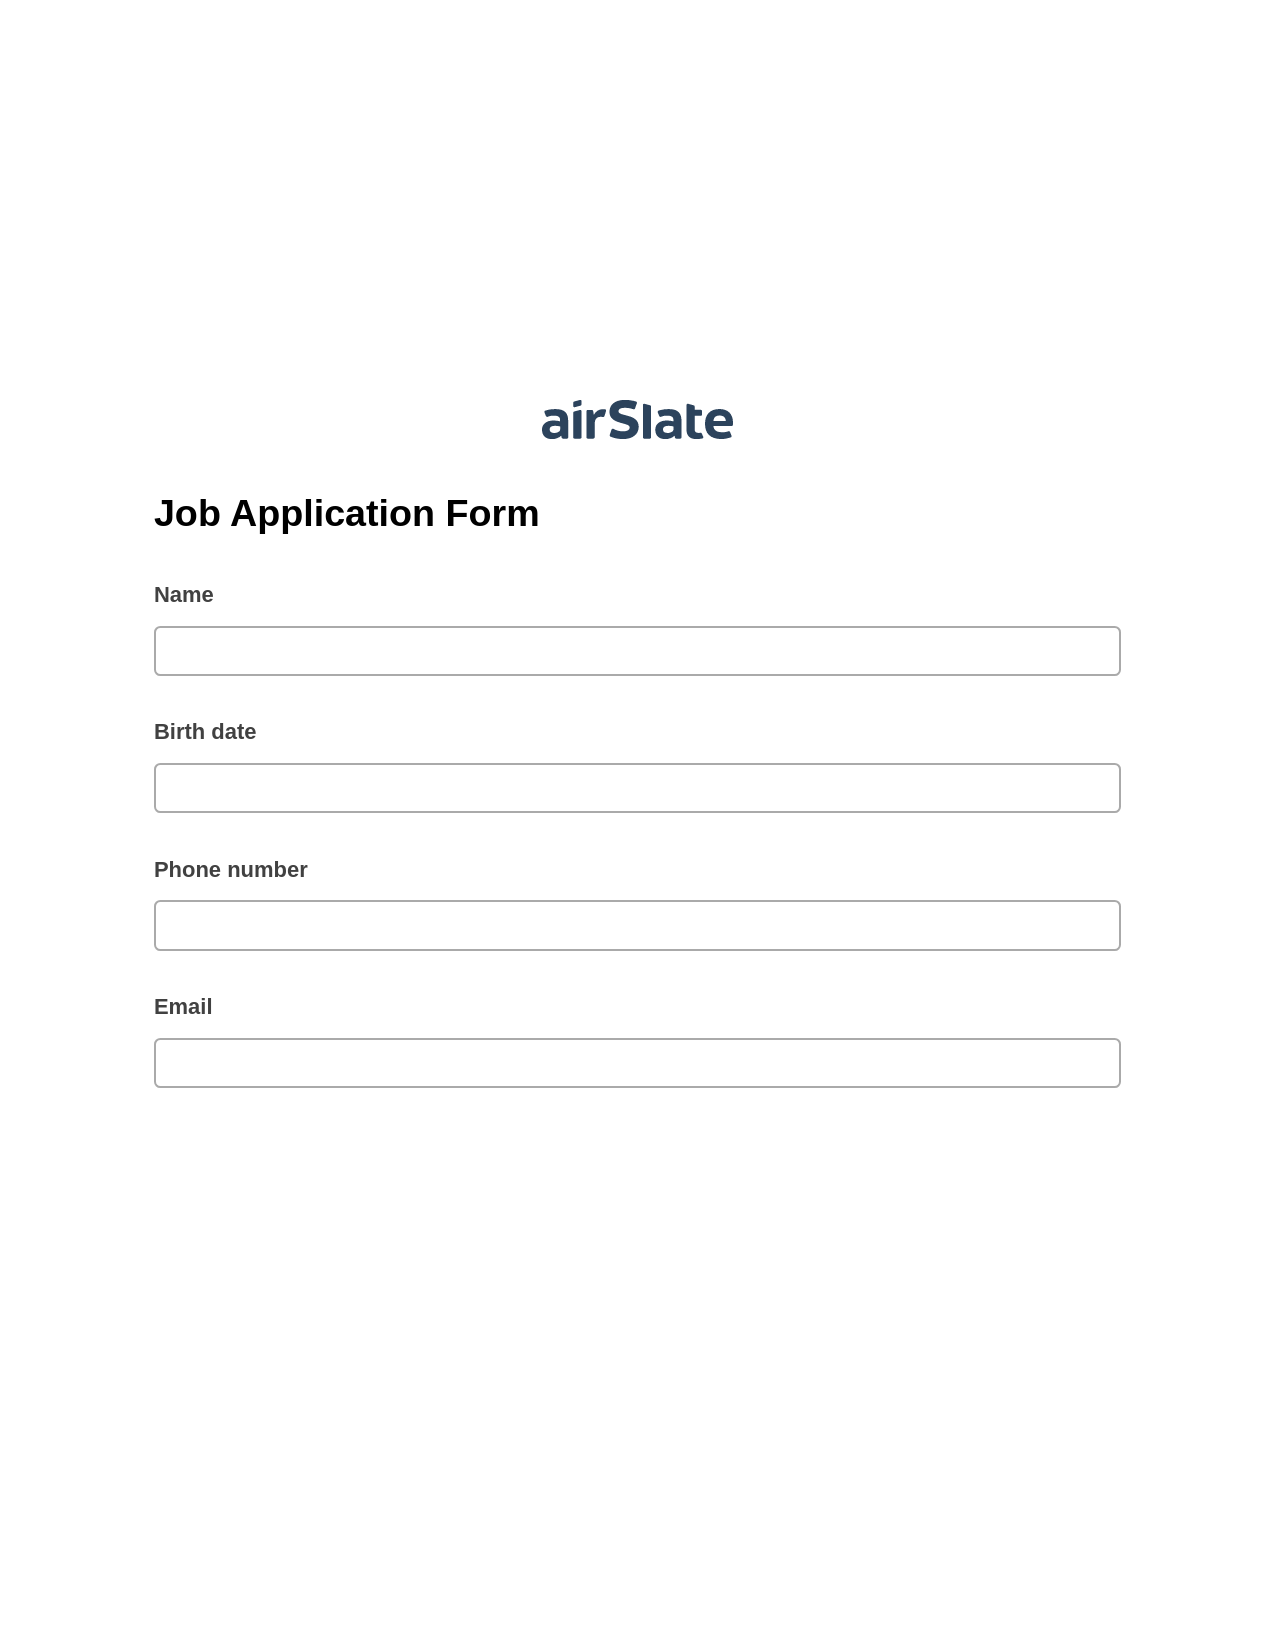 Multirole Job Application Form Pre-fill Dropdowns from Office 365 Excel Bot, Update Salesforce Record Bot, Post-finish Document Bot